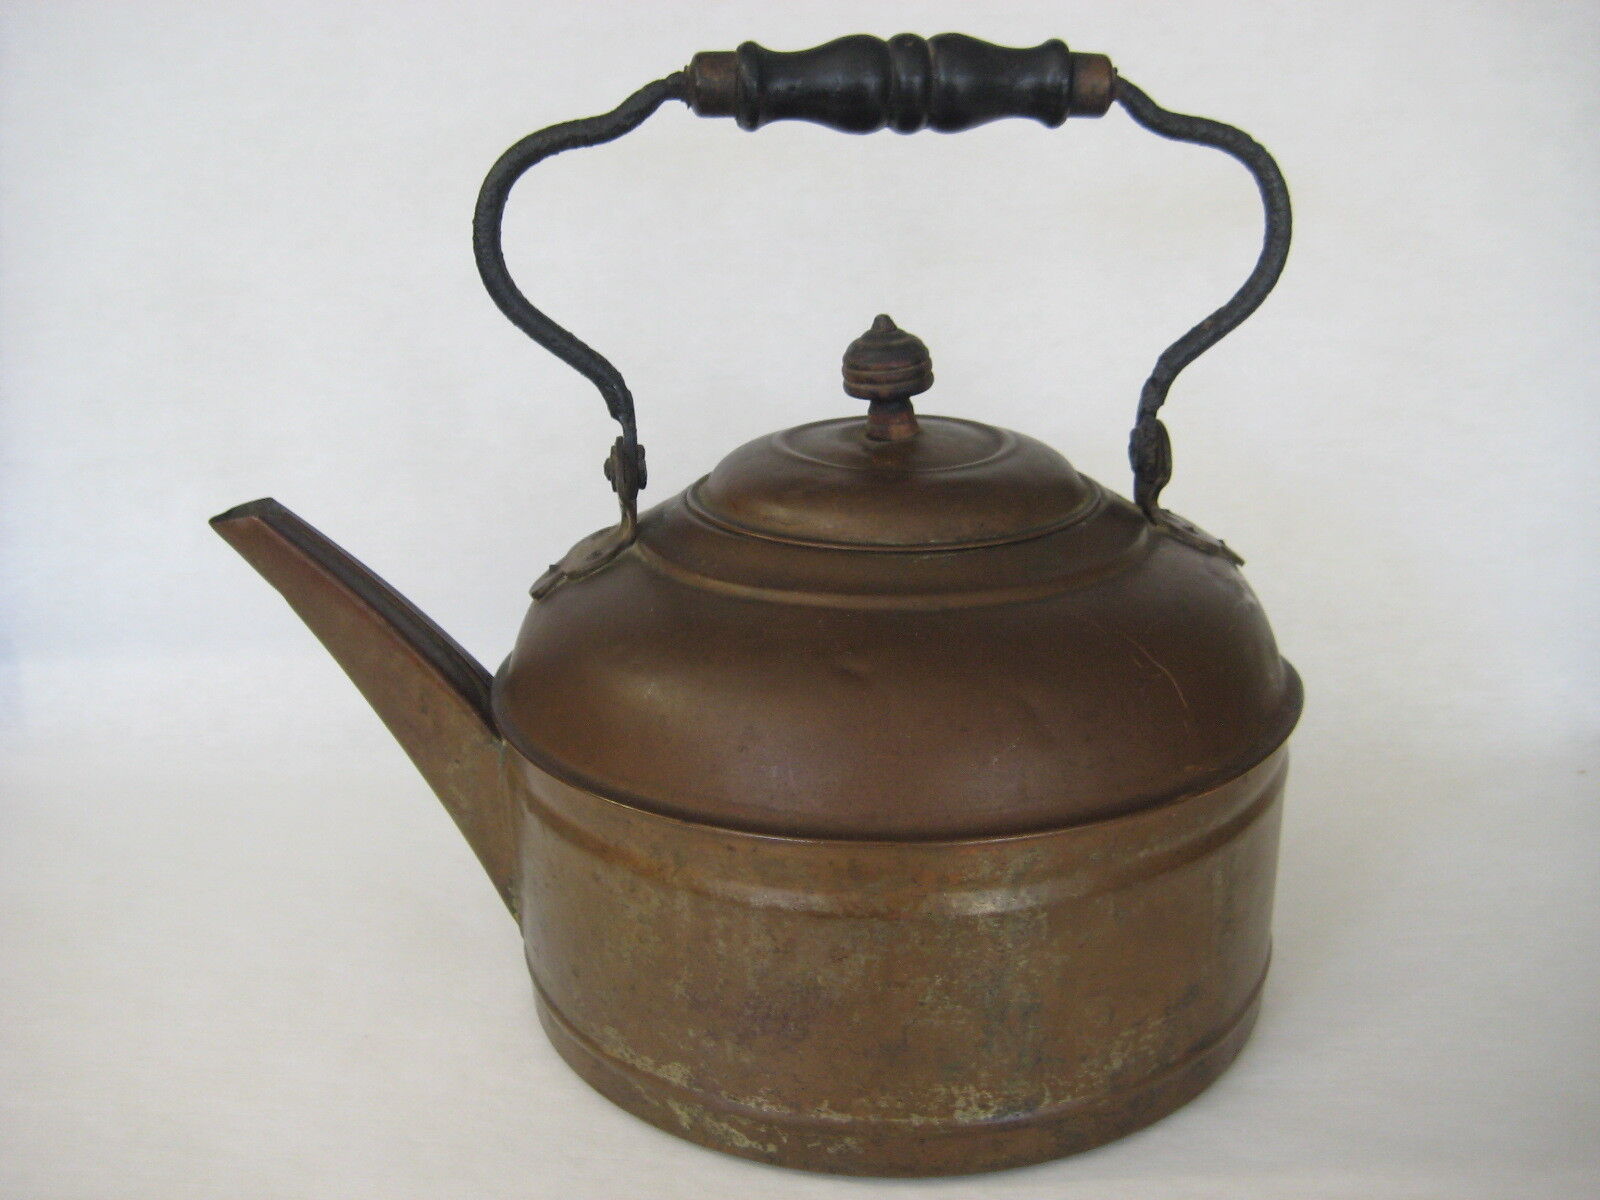 RARE OLD ANTIQUE ROCHESTER PATD MAY 9,93 COPPER WATER KETTLE,  6 QUART